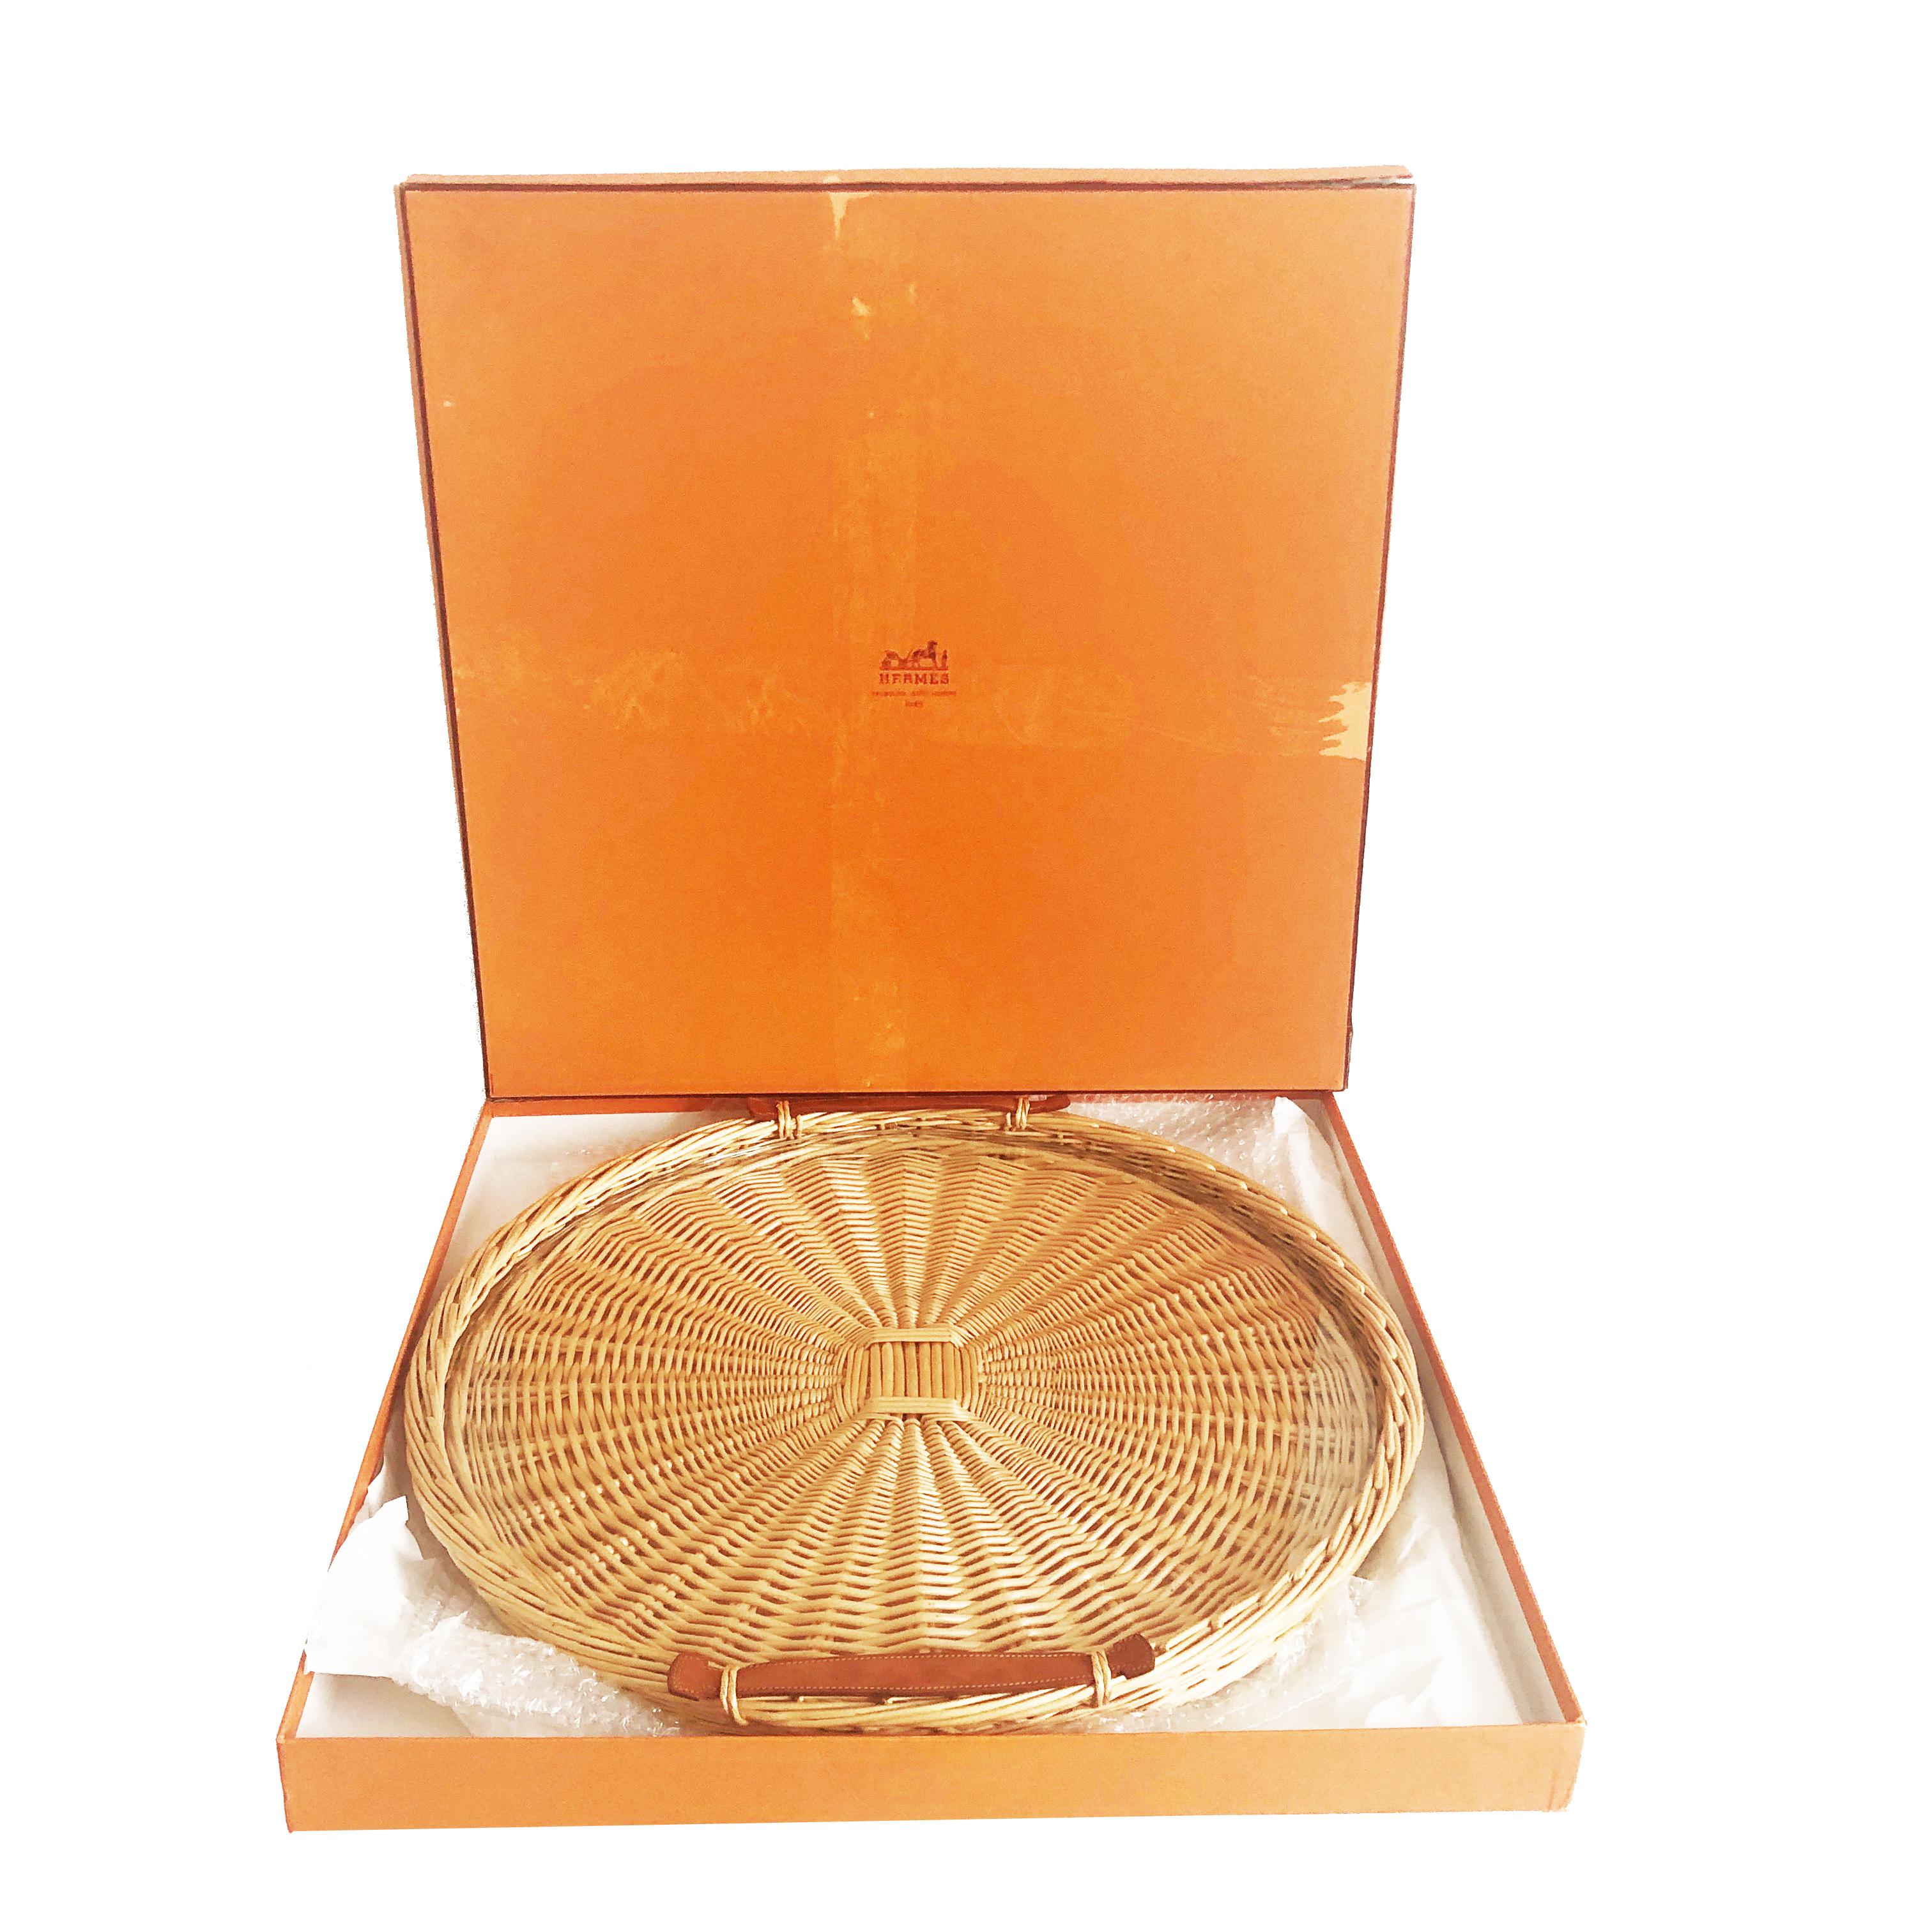 Authentic, preowned Hermes Oseraie Tray or Serving Platter Round Wicker with Bridle Handles & box.  Features a clear glass insert that is removable for cleaning.  Preowned with signs of prior use: patina & water spots to bridle leather handles, some